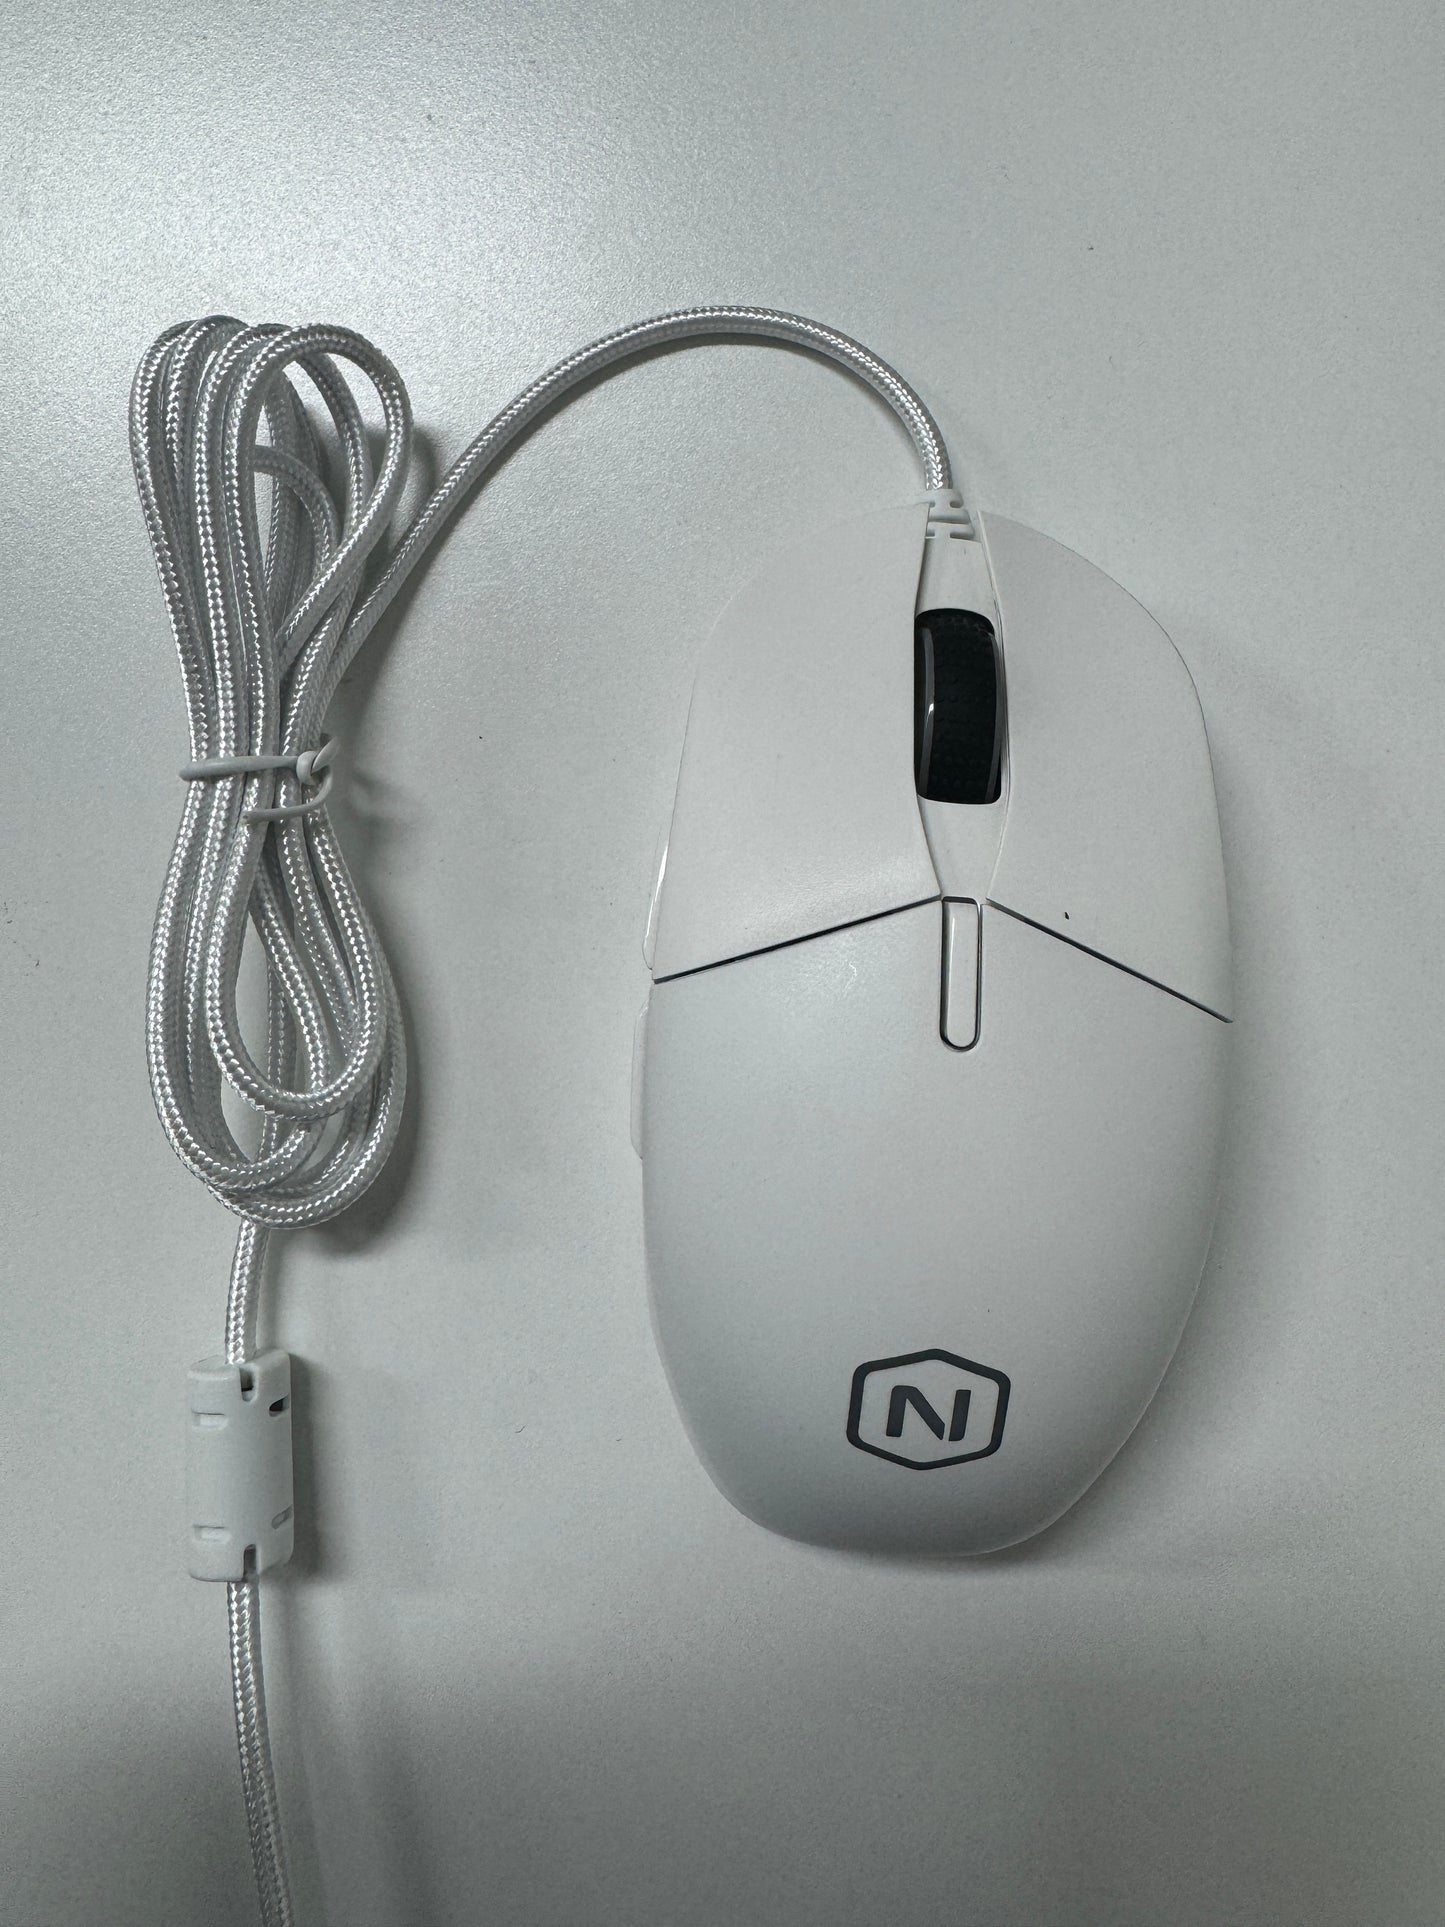 Professional Computer Mouse: High-Precision Sensing, Customizable Buttons, Comfortable Grip, Enhances Gaming Experience.